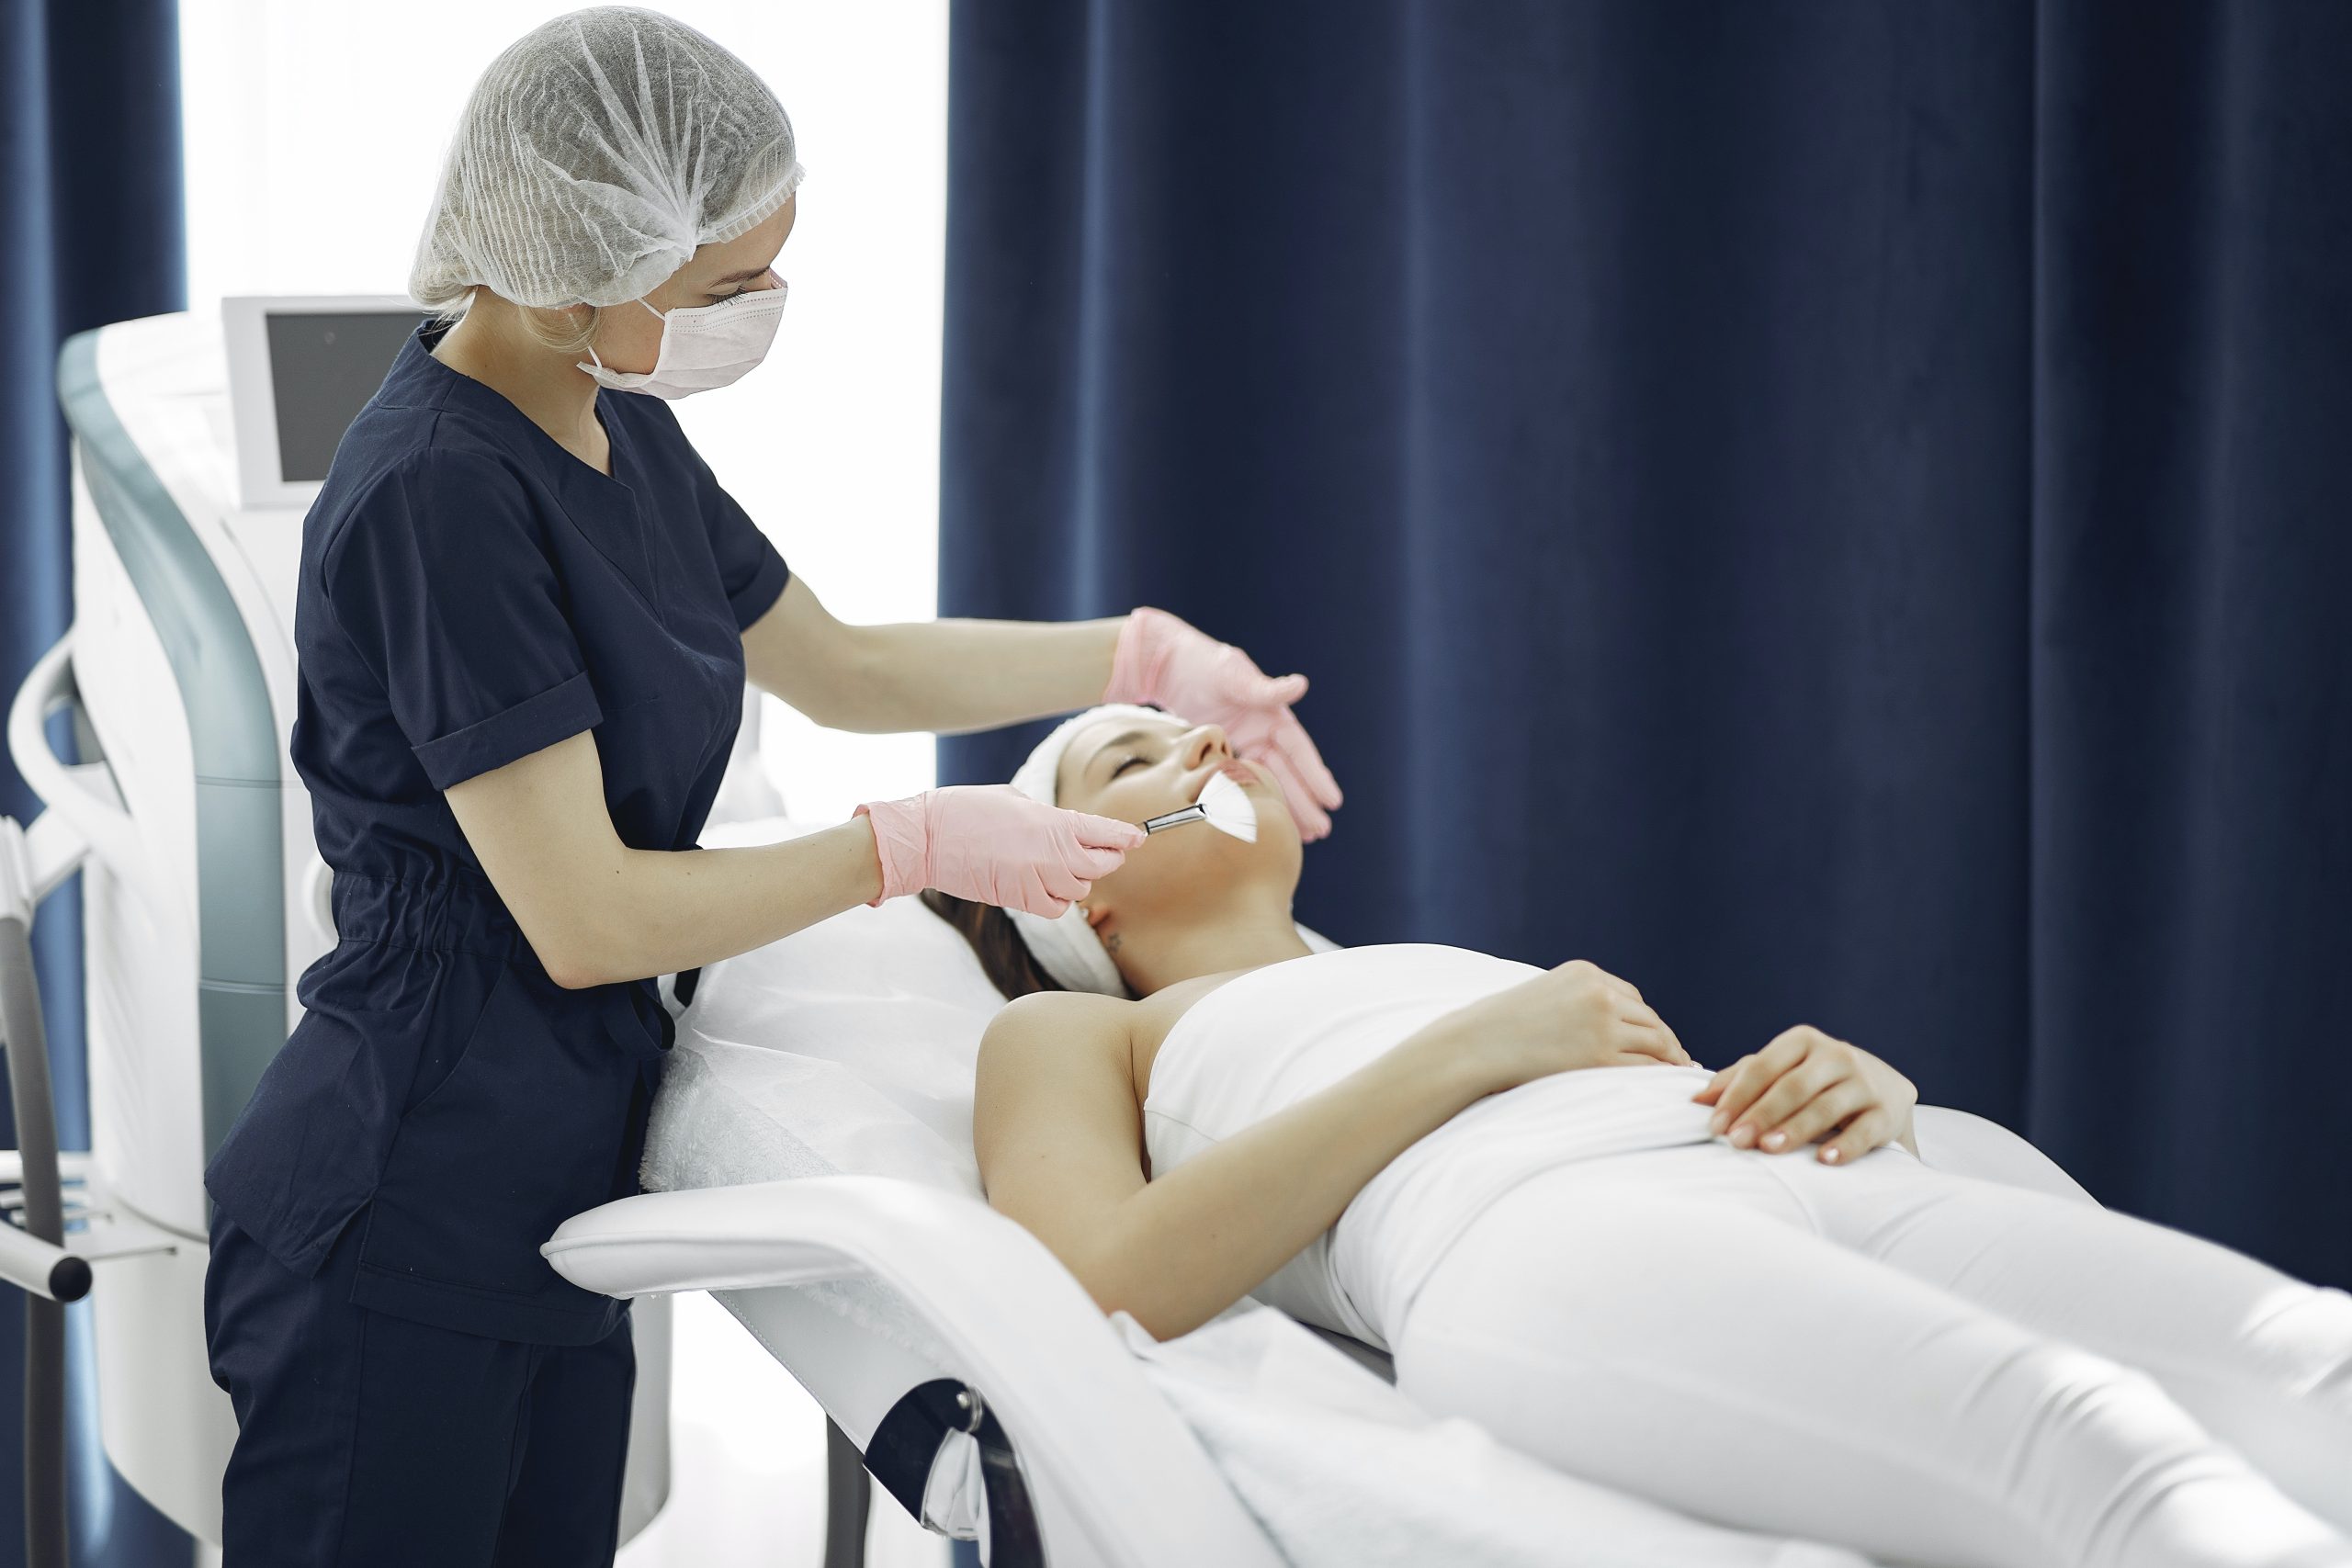 Skin Tightening Treatments and Their Benefits - Endeavour Articles